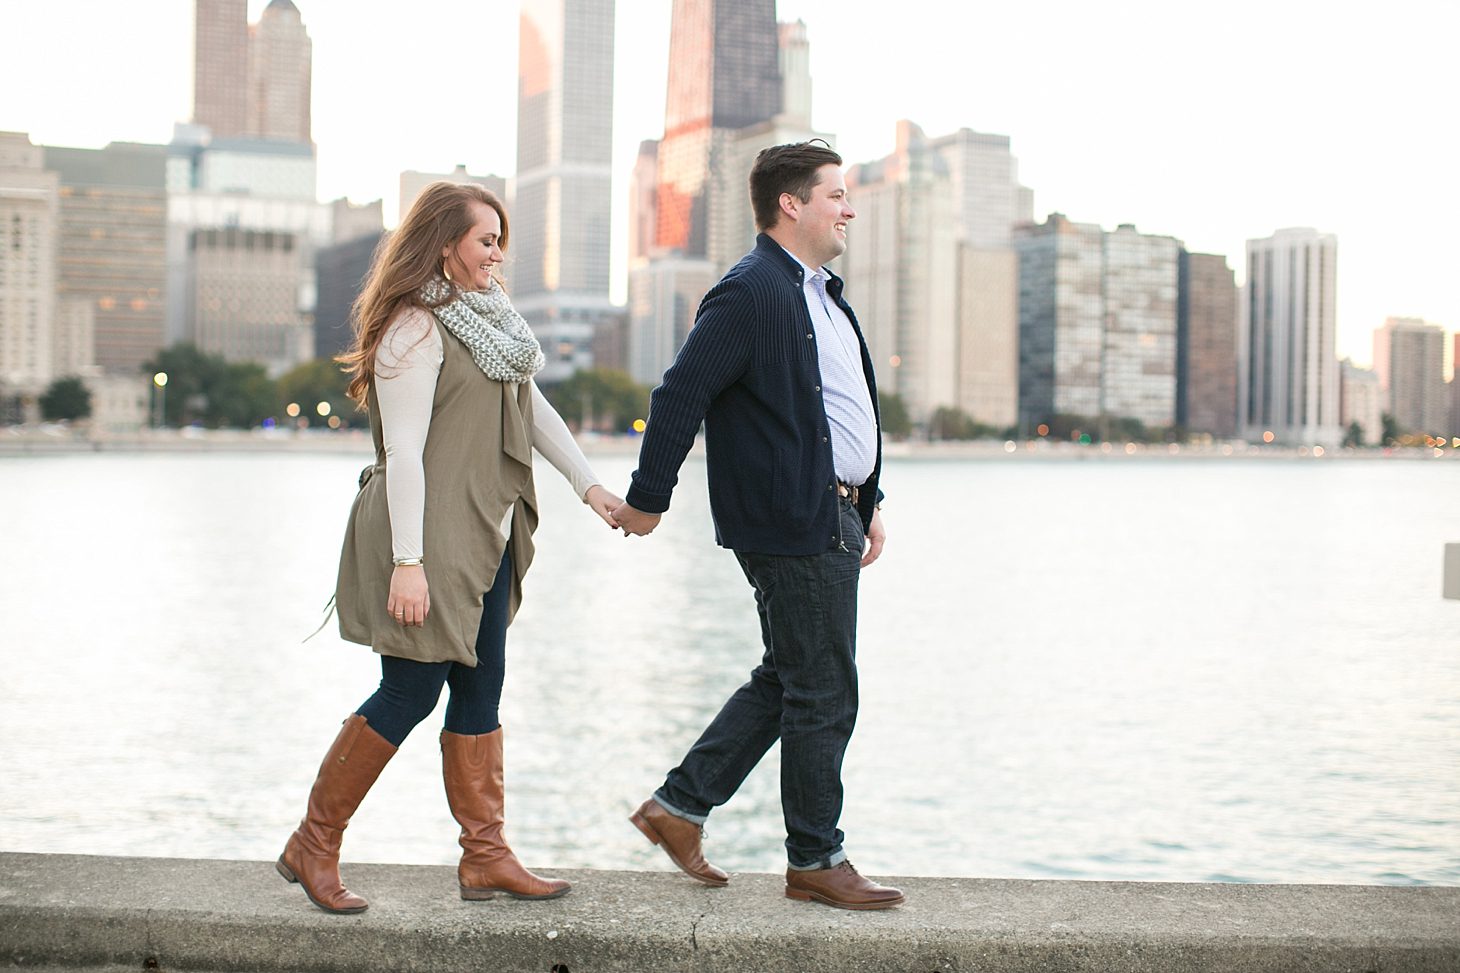 olive-park-engagement-photos-by-christy-tyler-photography_0021